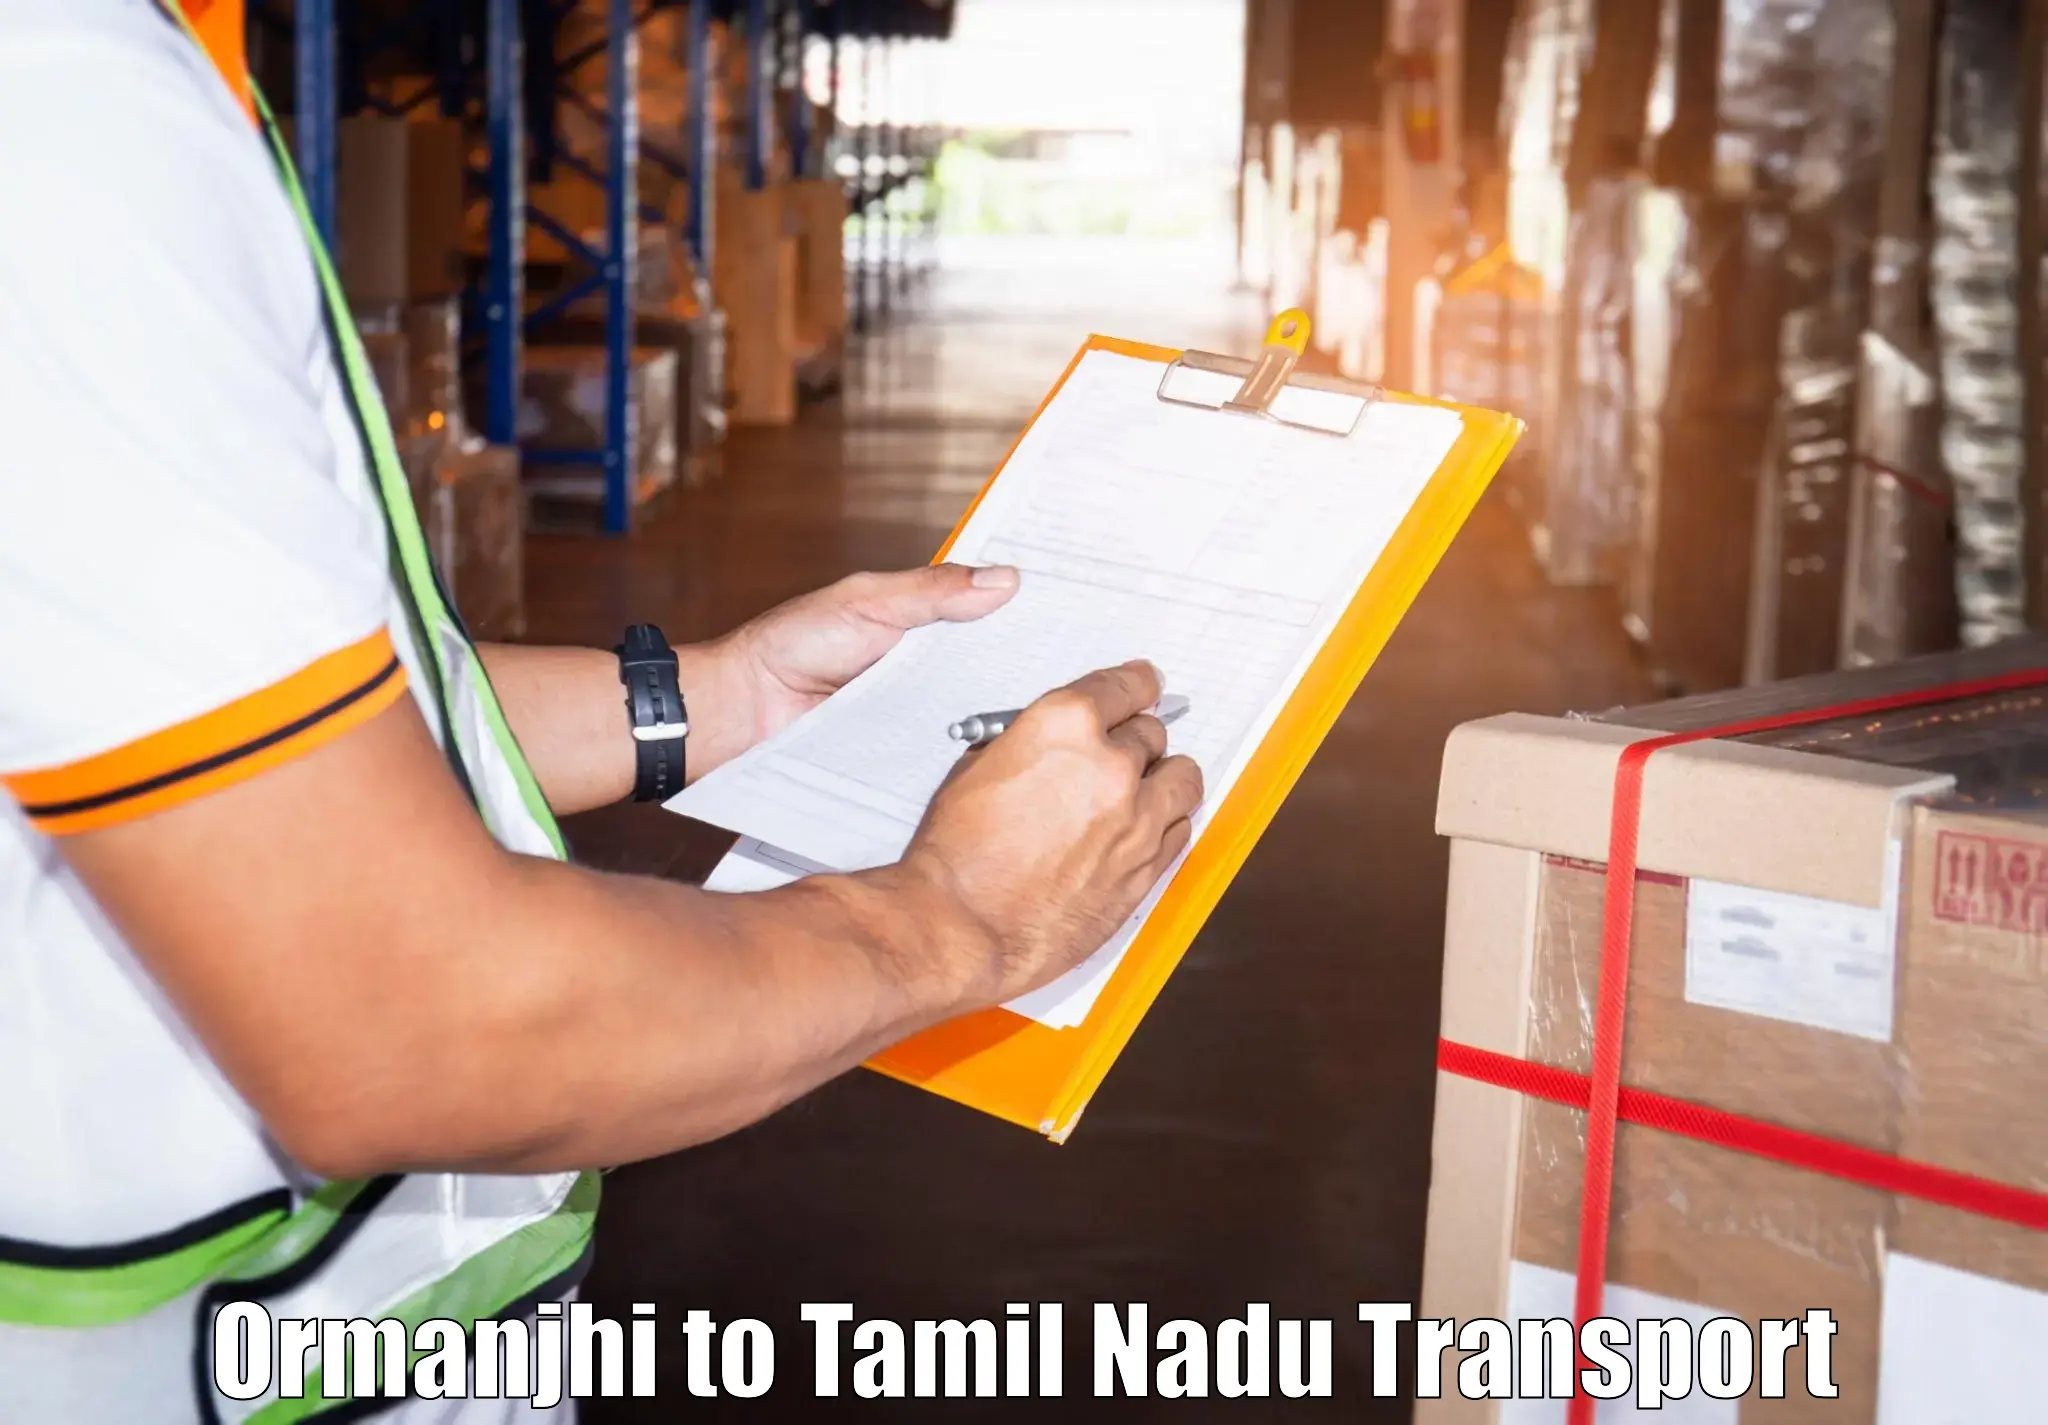 Door to door transport services in Ormanjhi to Ennore Port Chennai